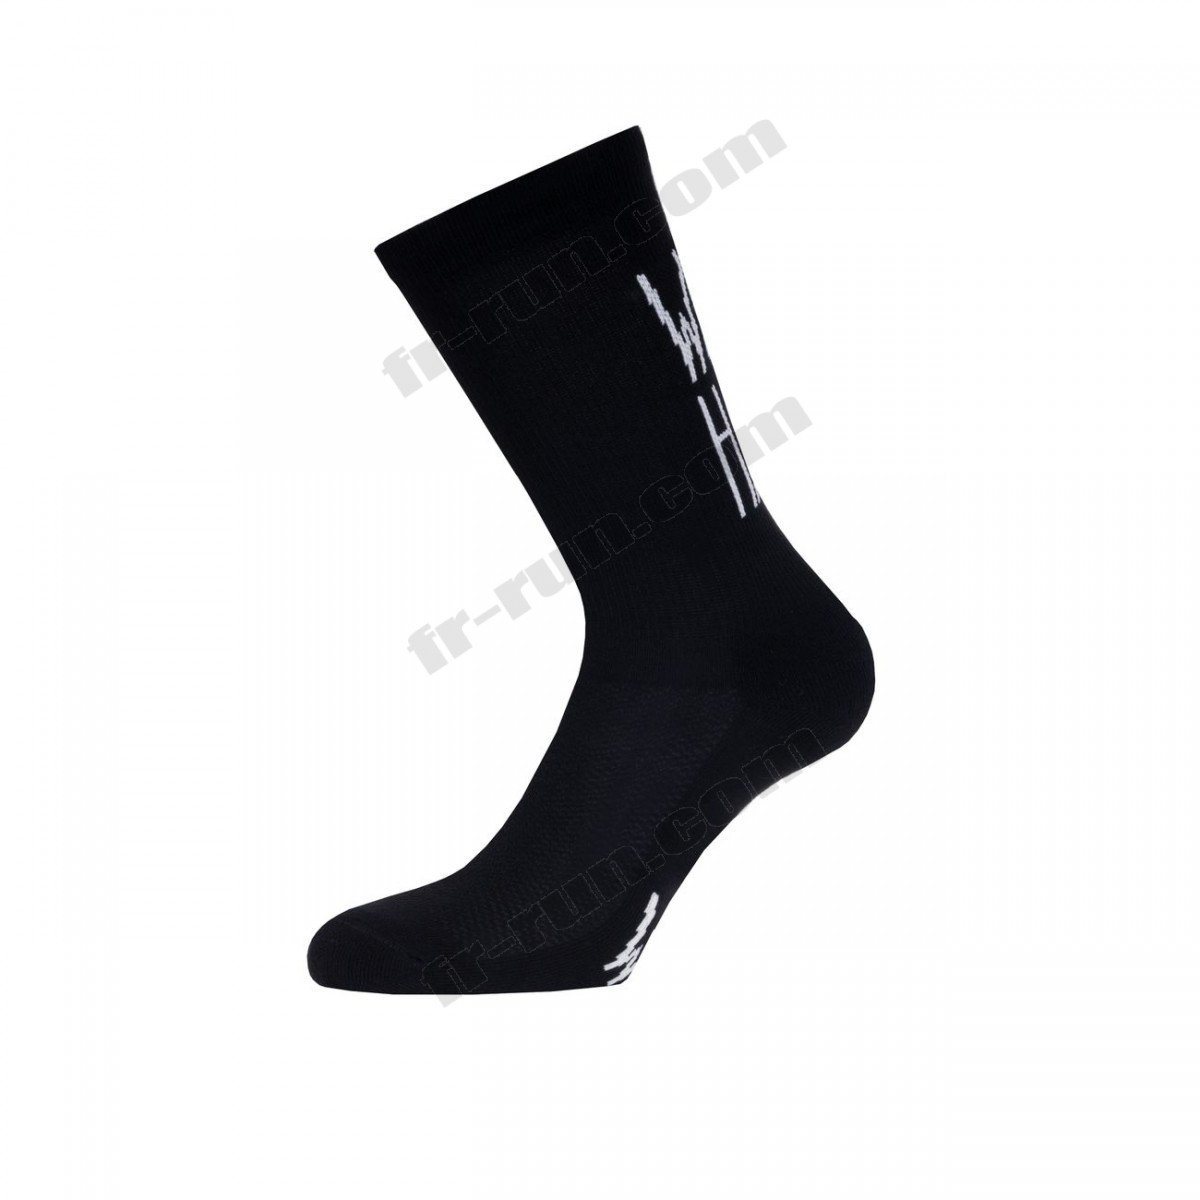 Pacific And Co/running adulte PACIFIC and CO WORK HARD Unisex Performance Socks ◇◇◇ Pas Cher Du Tout - Pacific And Co/running adulte PACIFIC and CO WORK HARD Unisex Performance Socks ◇◇◇ Pas Cher Du Tout